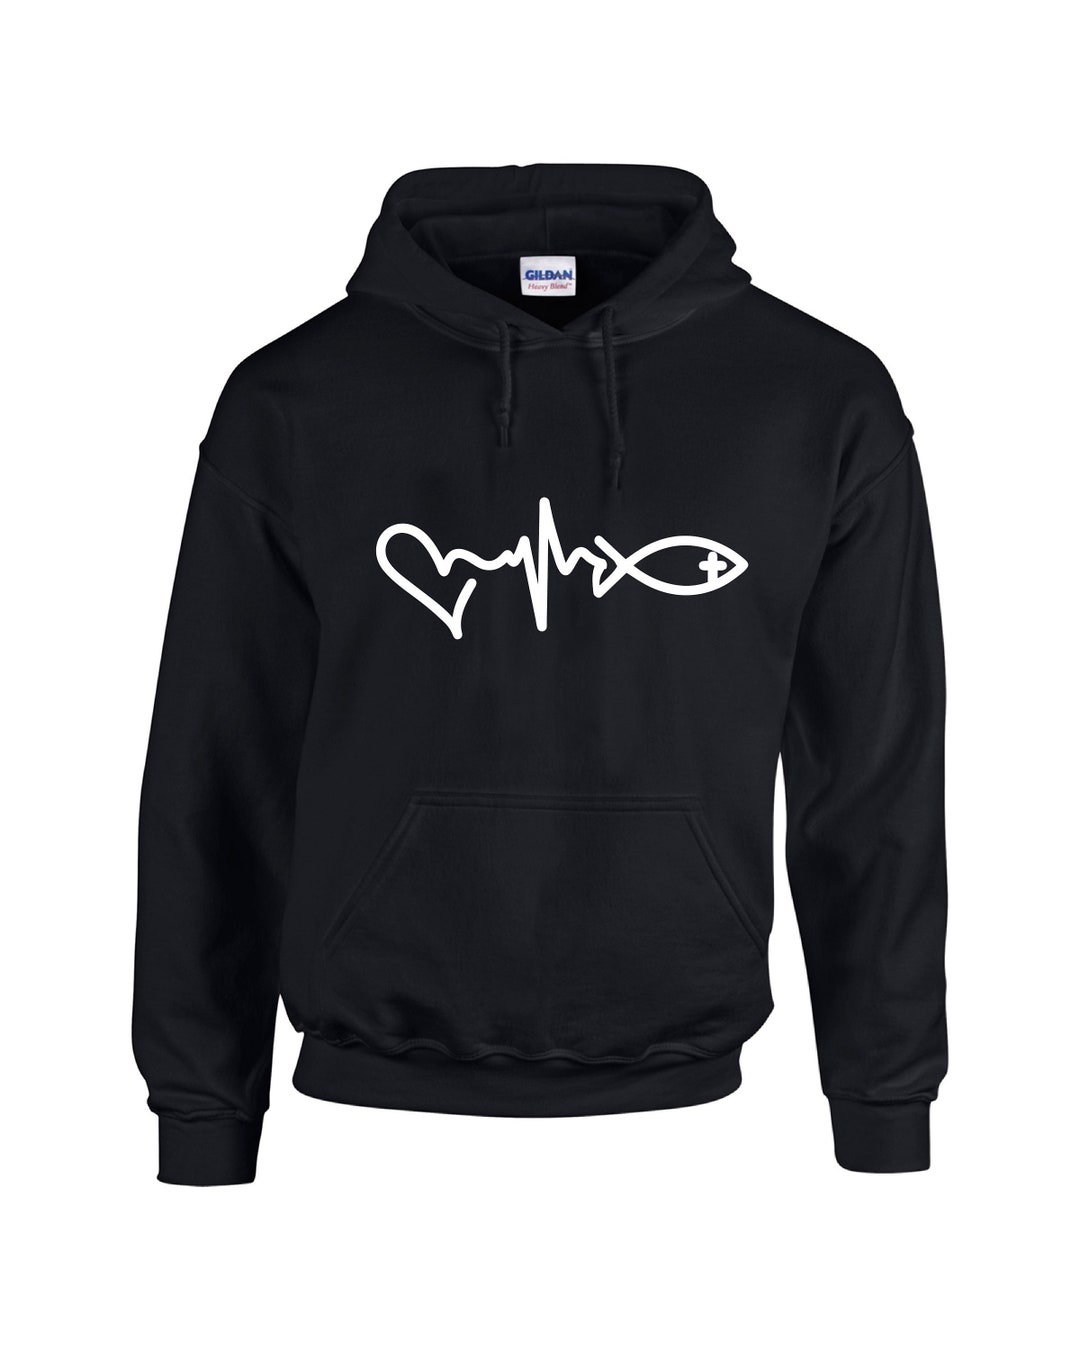 FISHING HOODIE, HEARTBEAT Hoodie, Stay Warm With the Fish